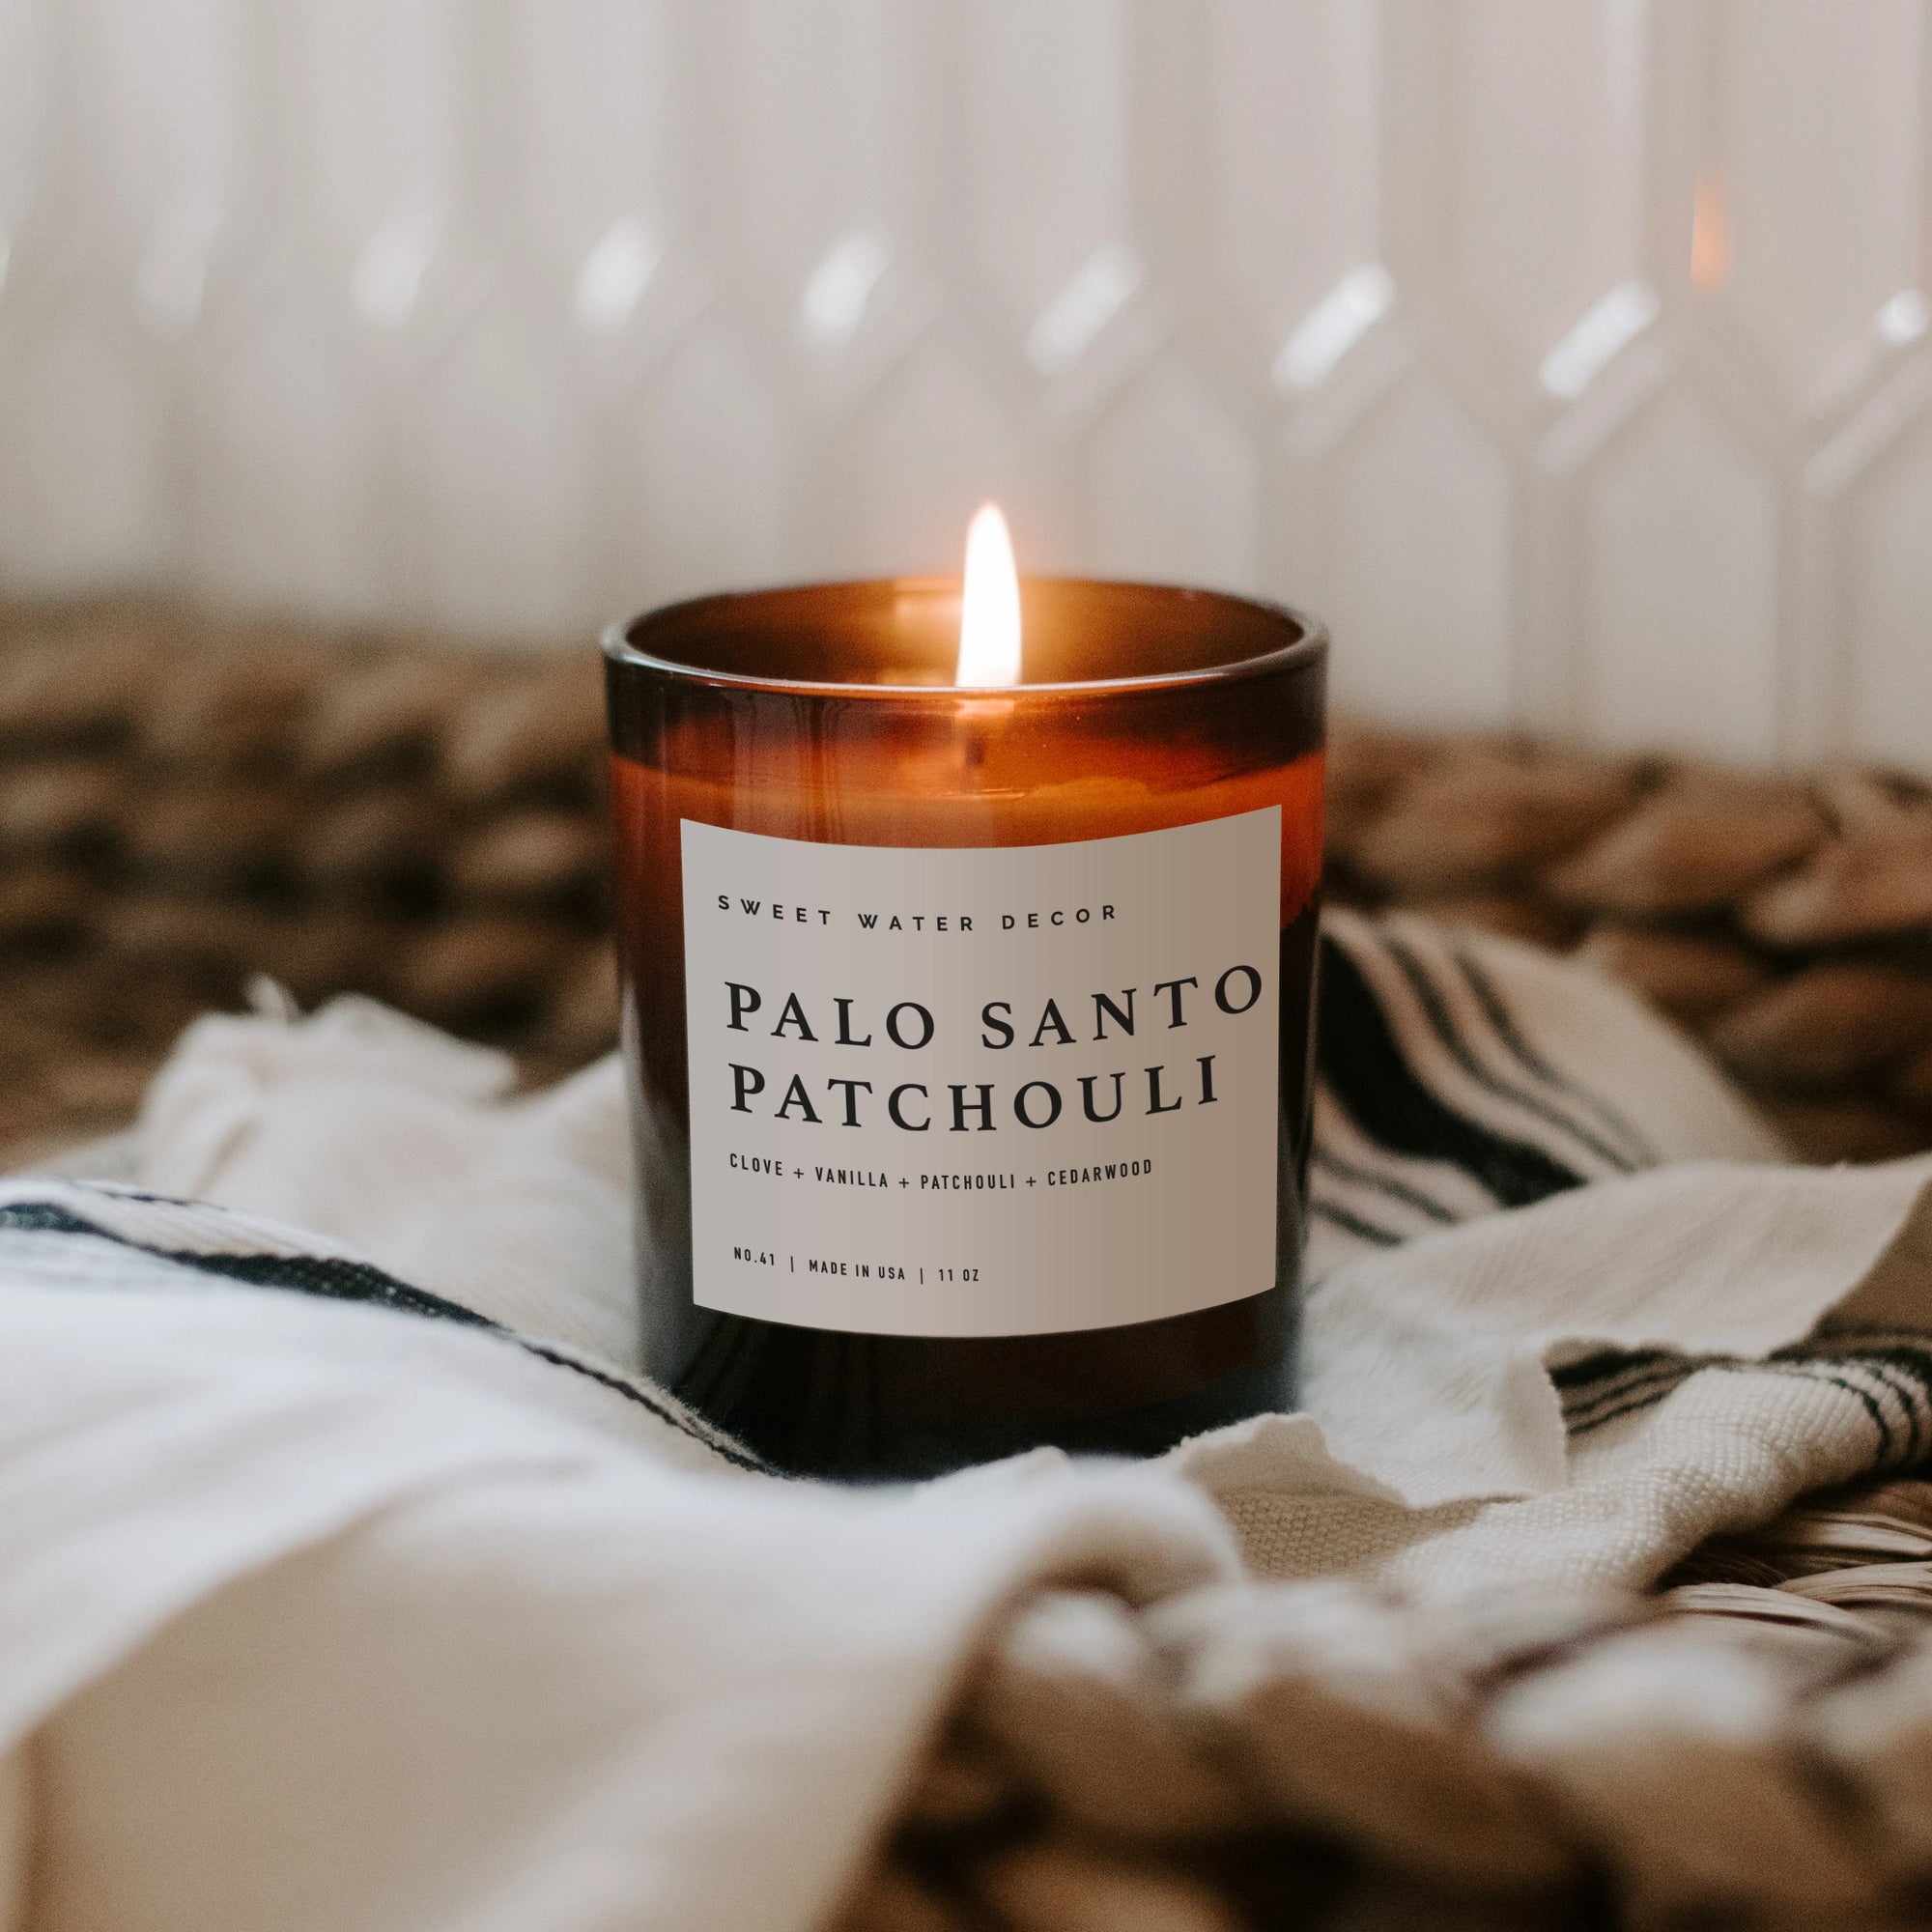 Palo santo patchouli soy candle in amber jar, lit on a towel and woven console.